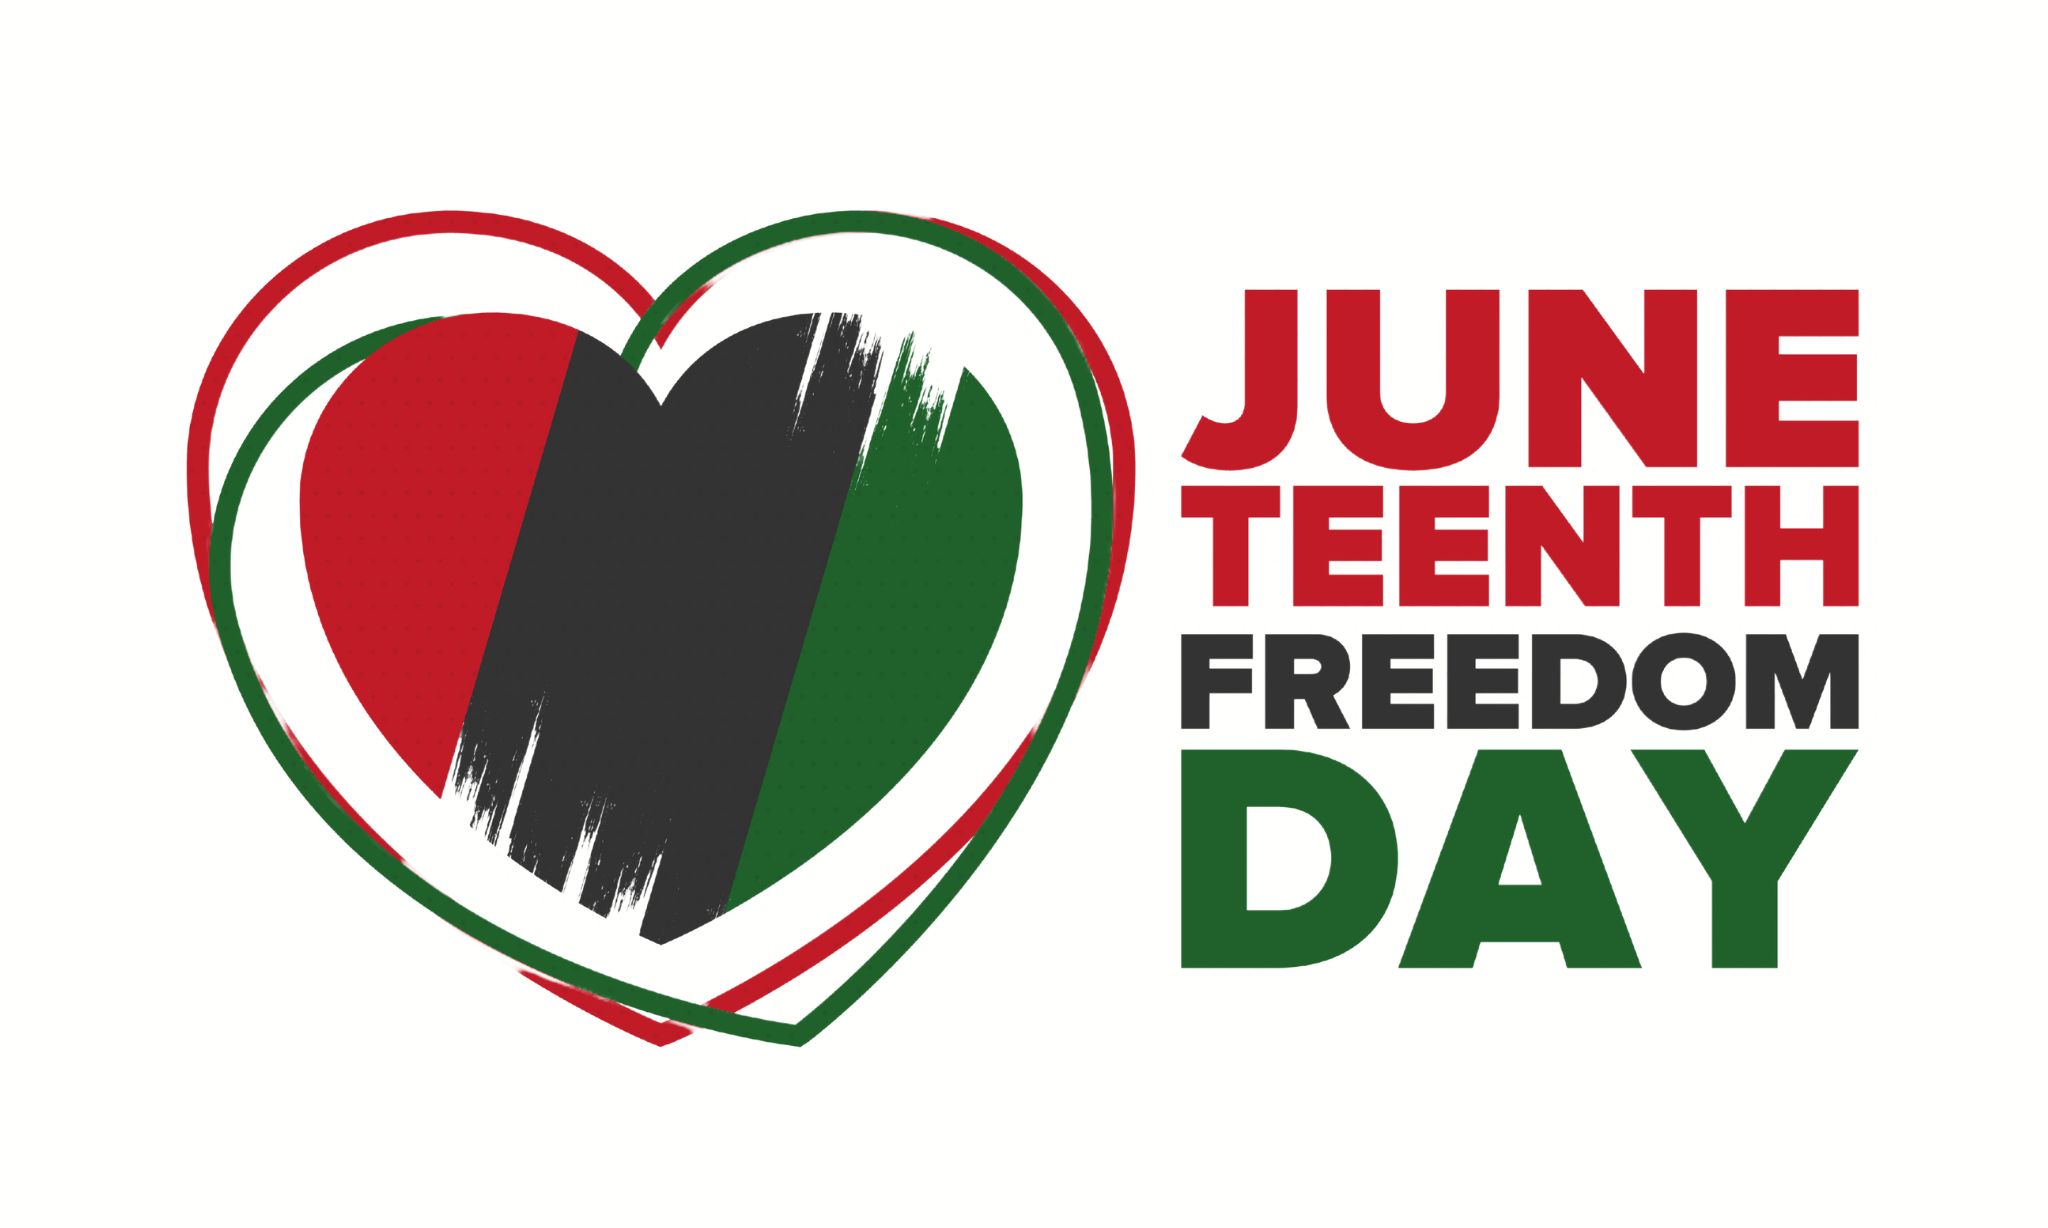 Juneteenth freedom day 2022